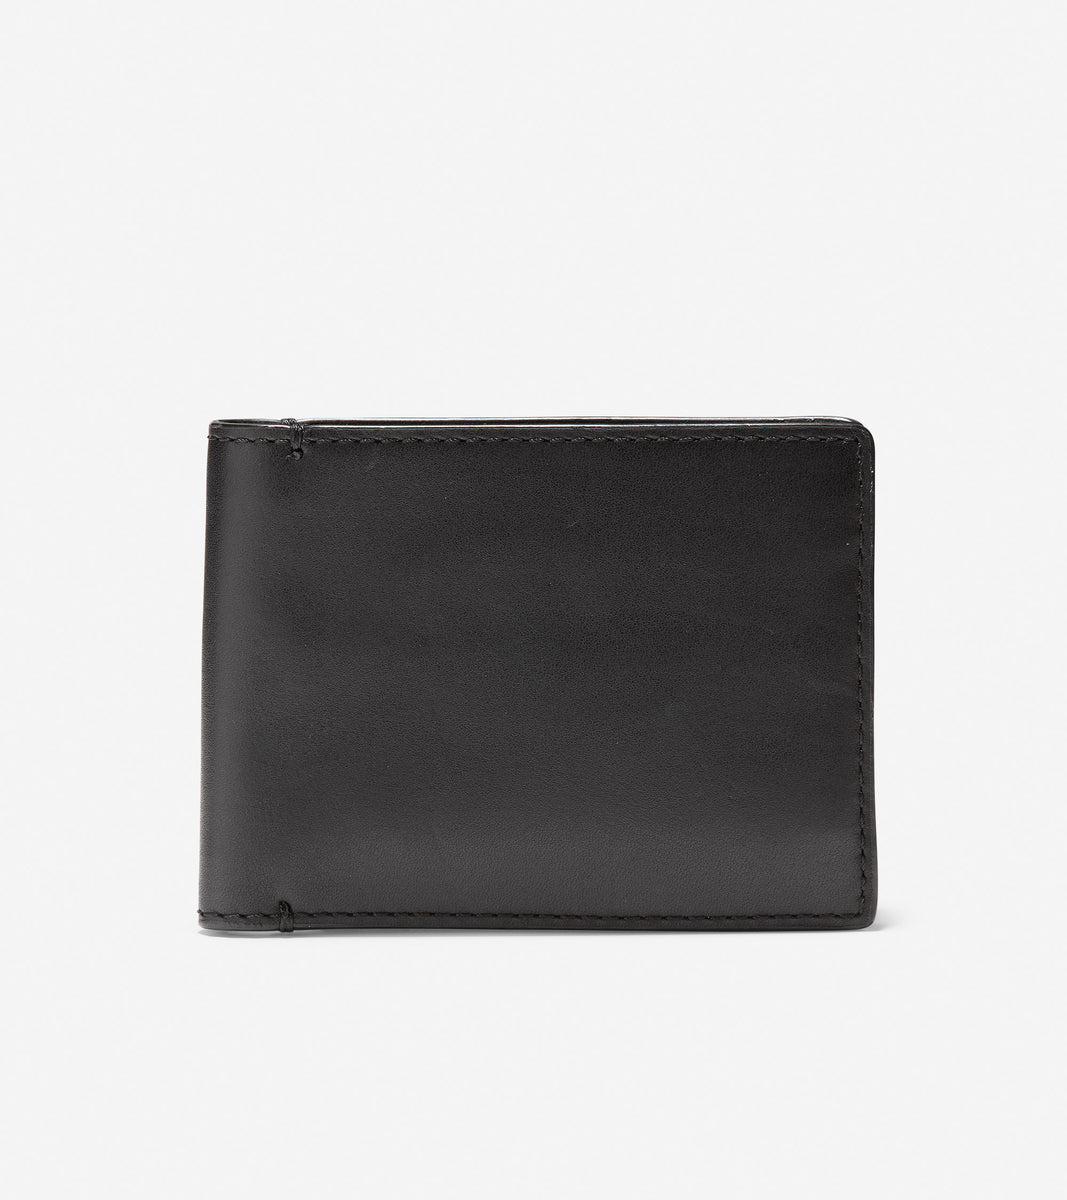 GRANDSERIES Leather Bifold With Removable Pass Case